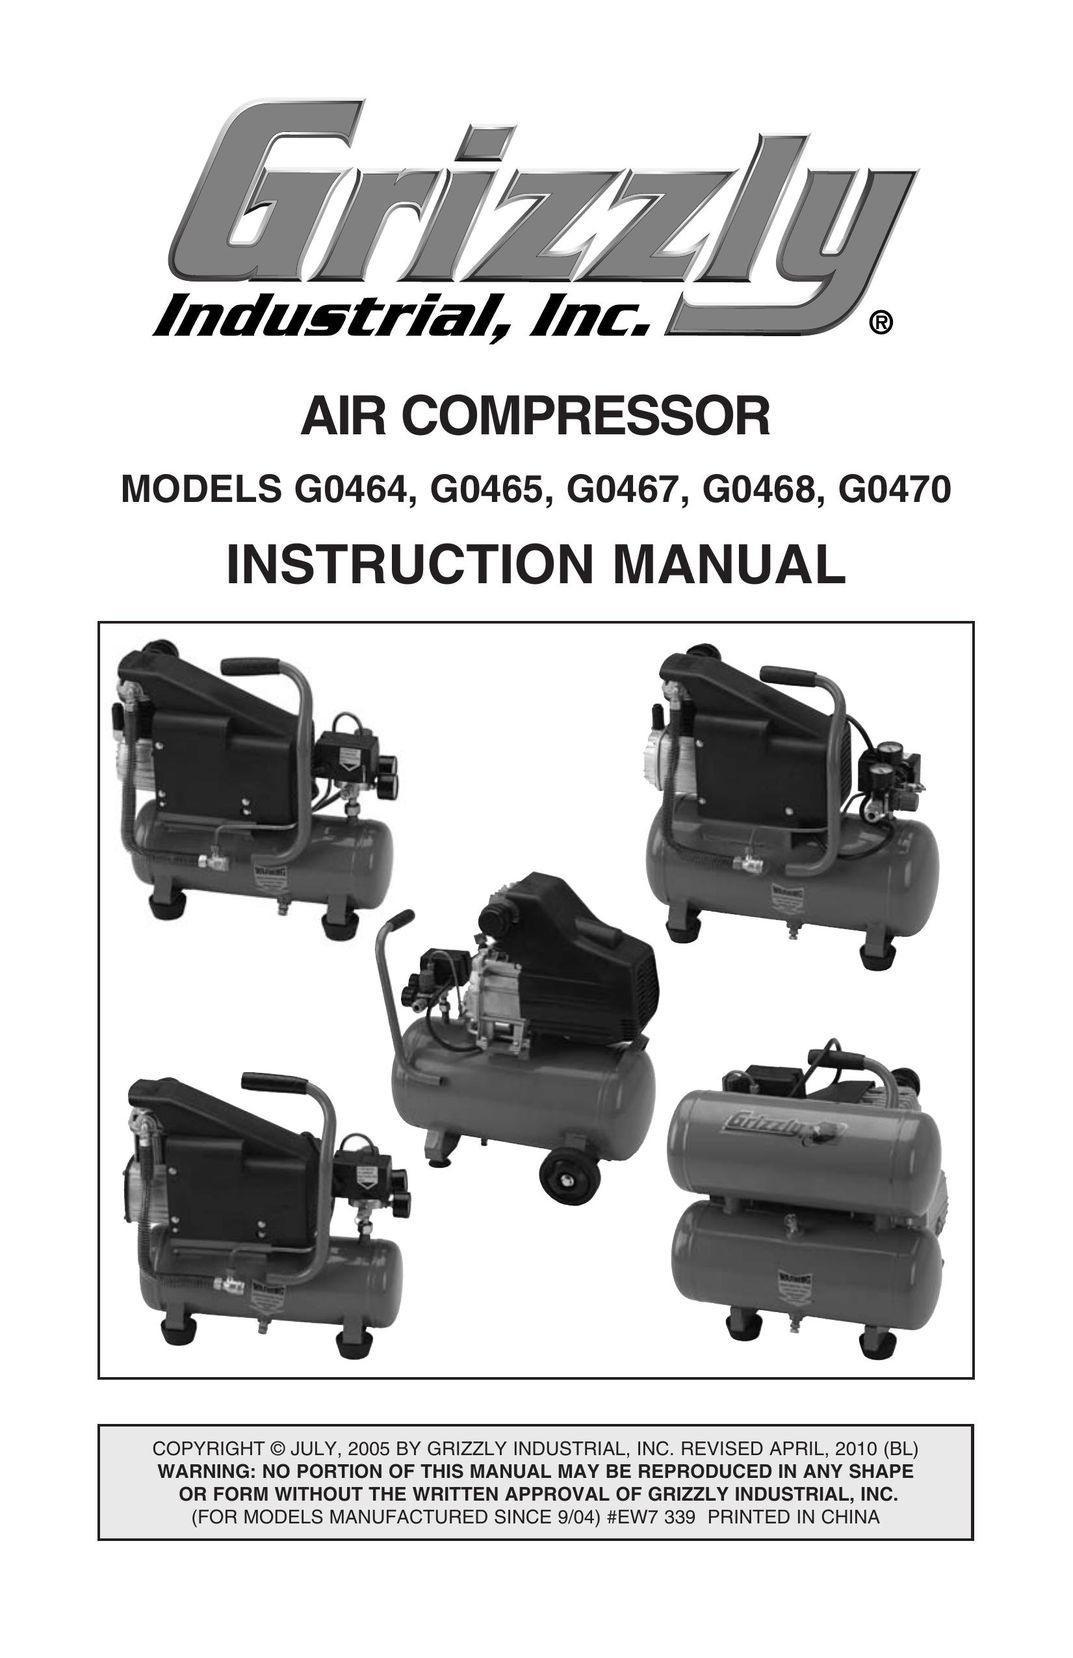 Grizzly G0467 Air Compressor User Manual